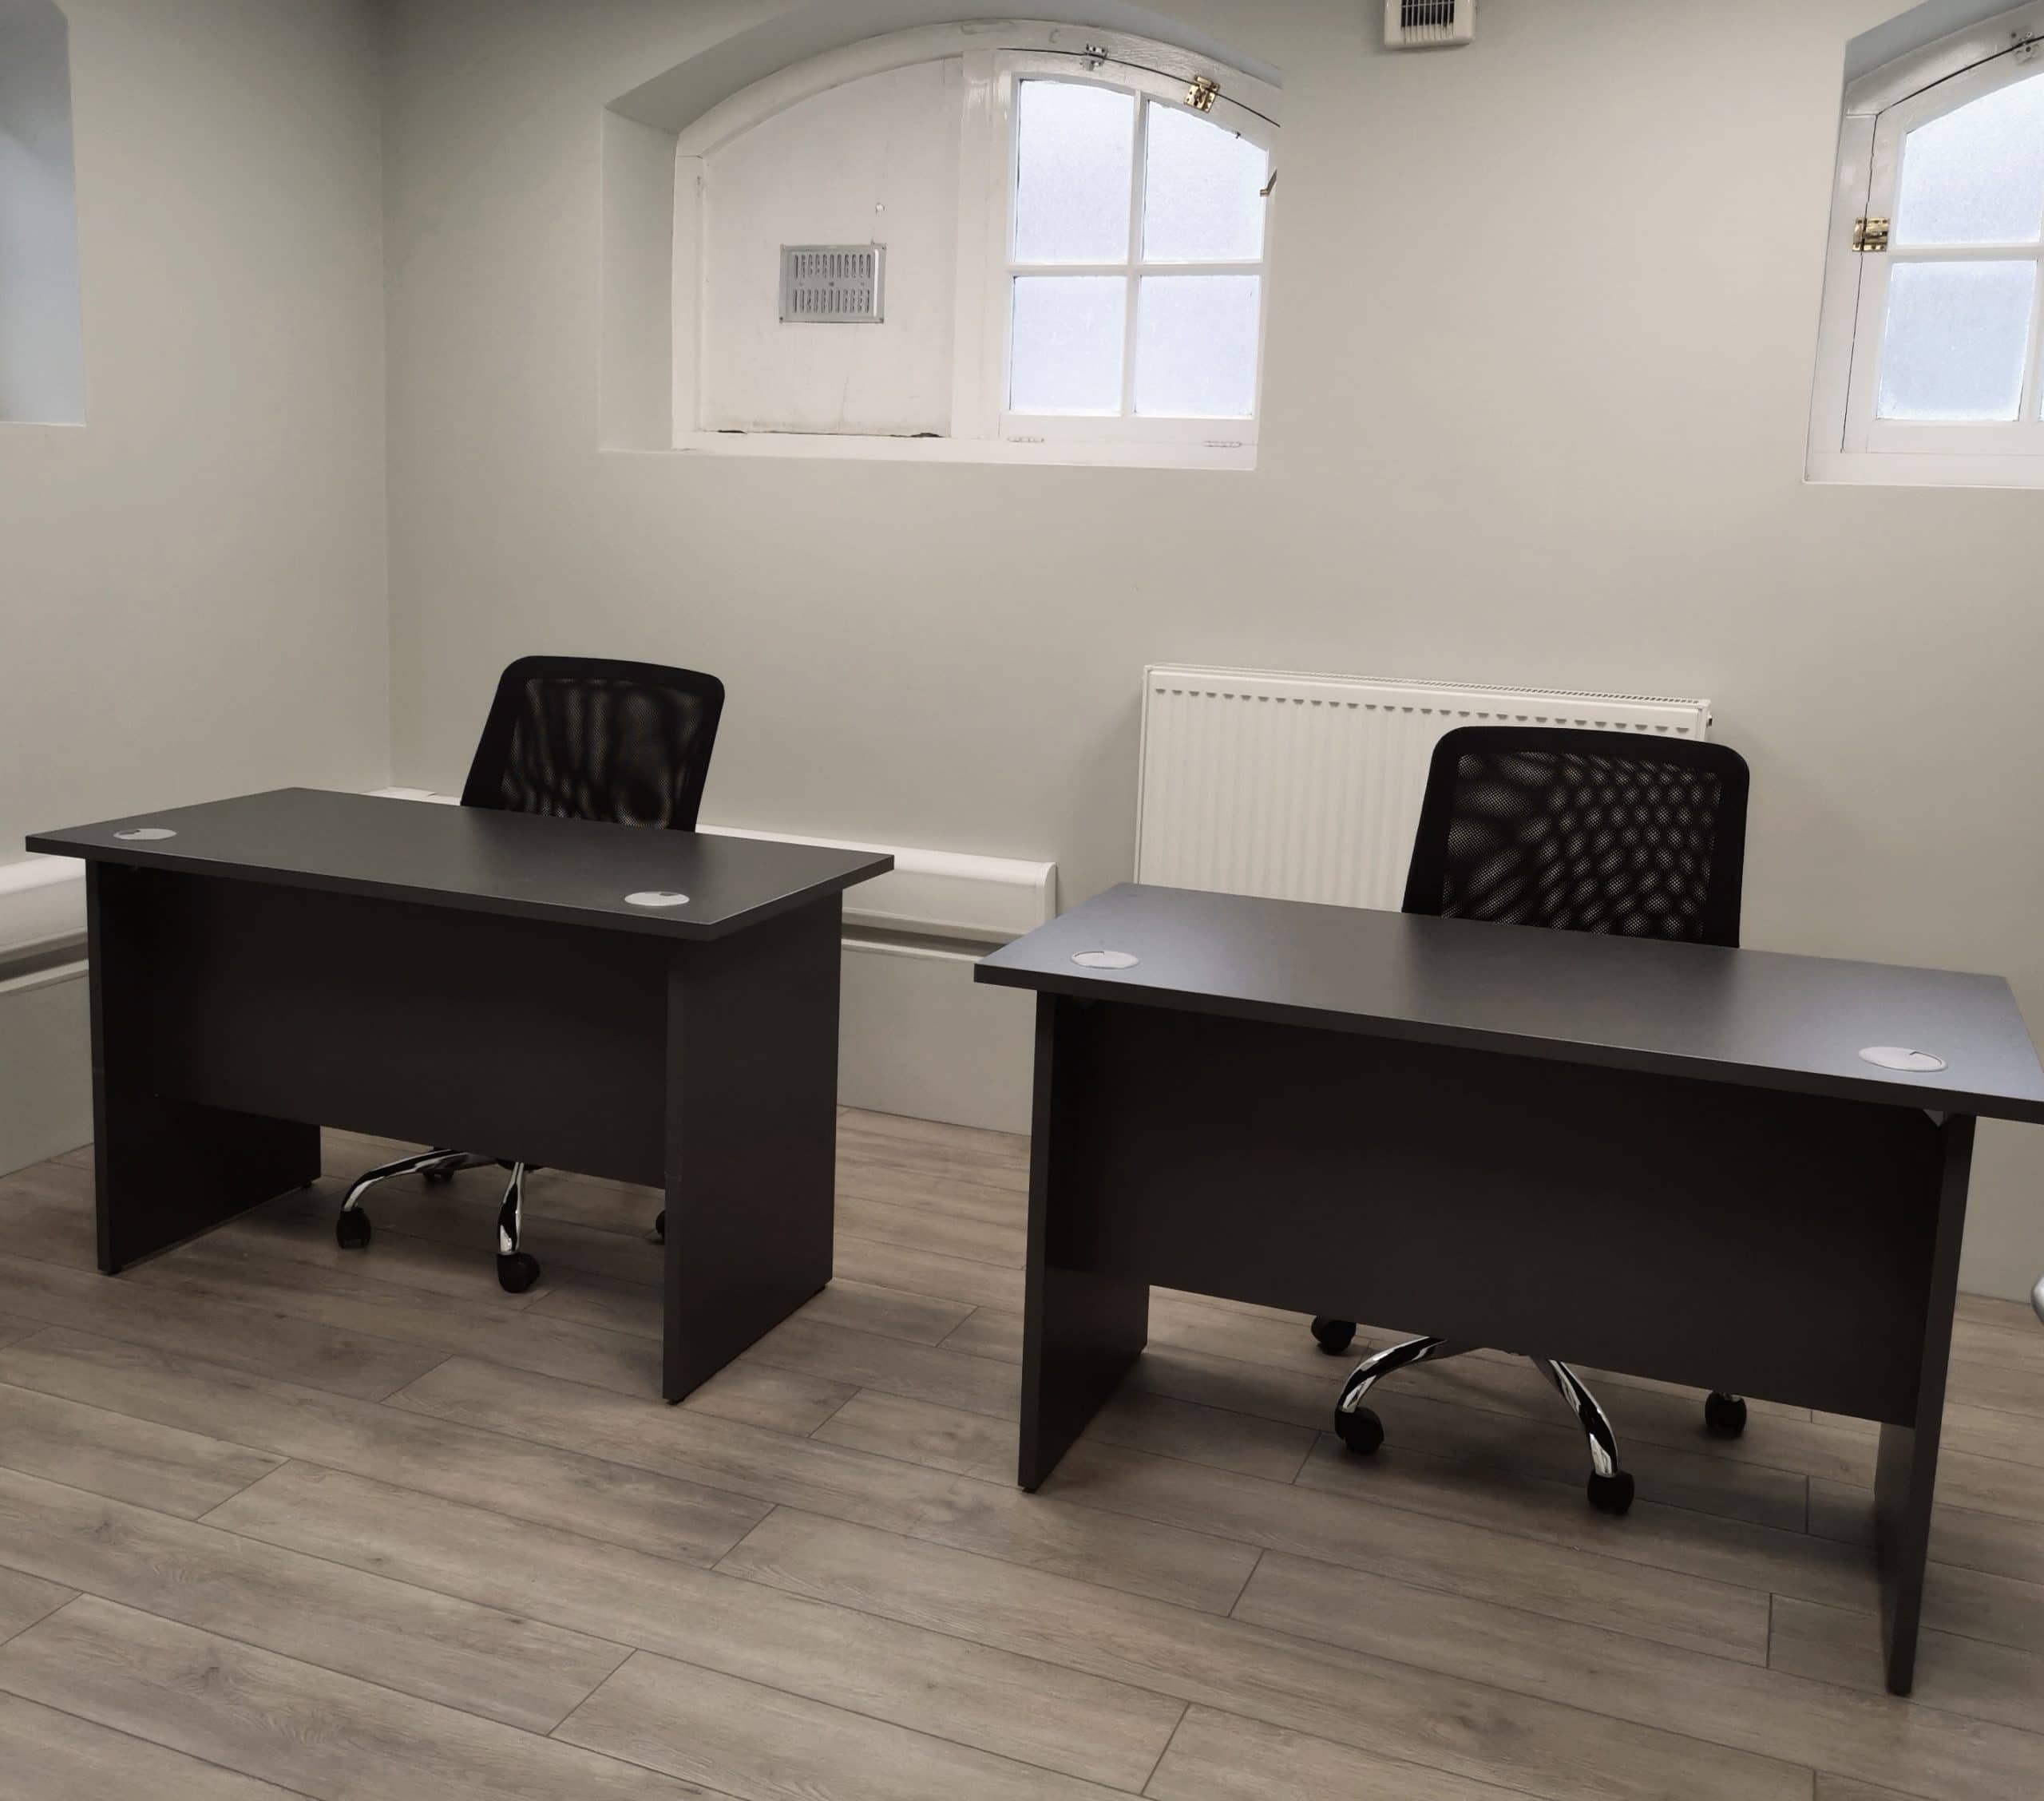 Offices available to rent at Cinch Storage